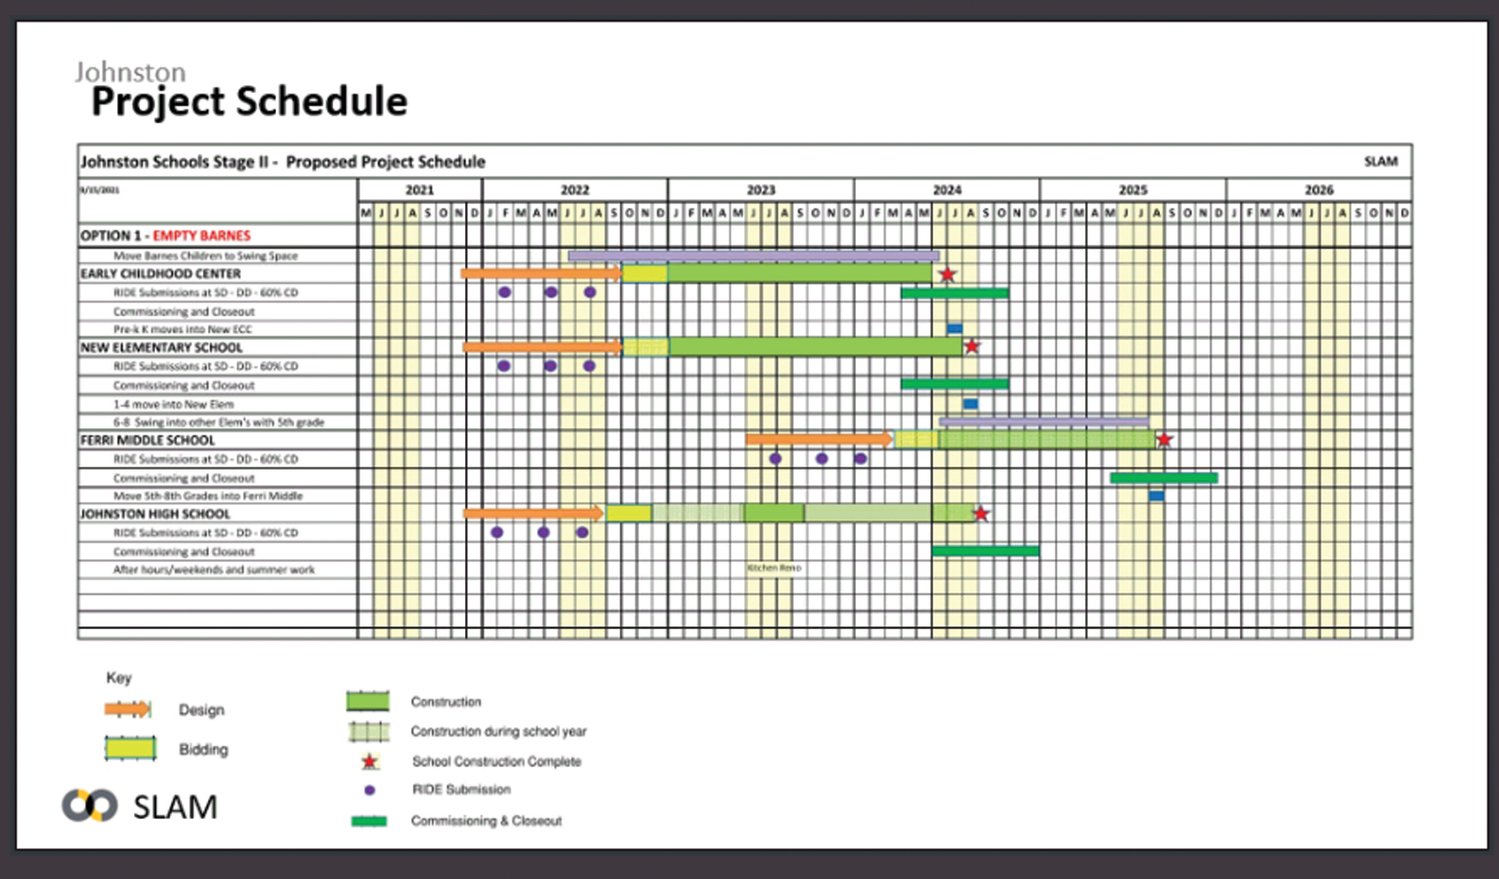 The schedule for construction and opening of the new schools and newly renovated schools is ambitions, and laid out here by the architectural firm SLAM Collaborative.